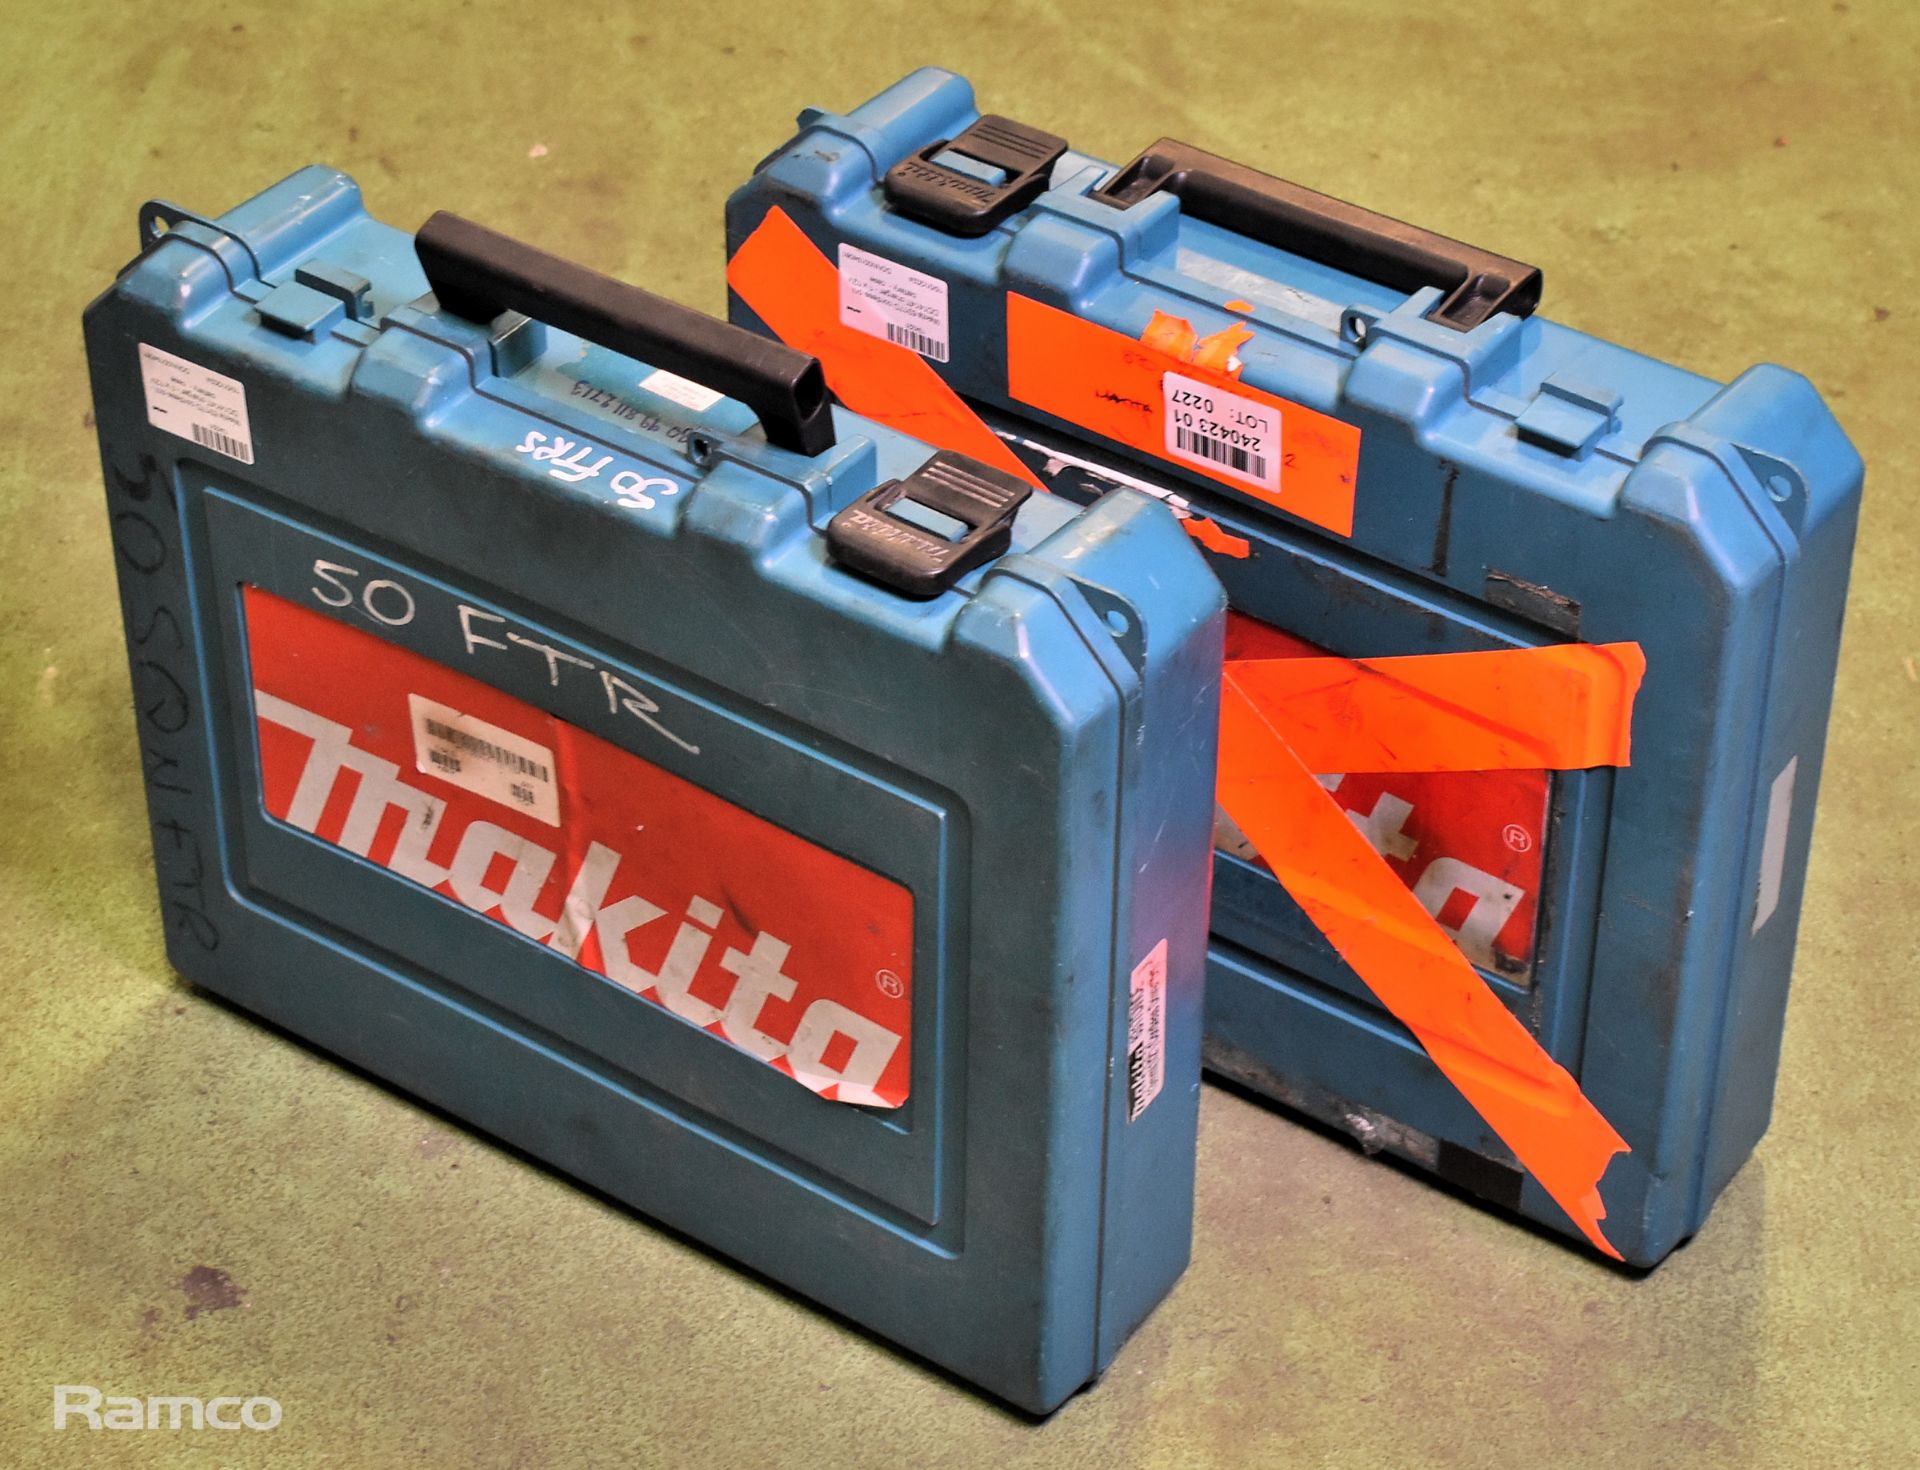 2x Makita 6317D cordless drills - DC1414T charger - 1x 12V battery - case - Image 8 of 8